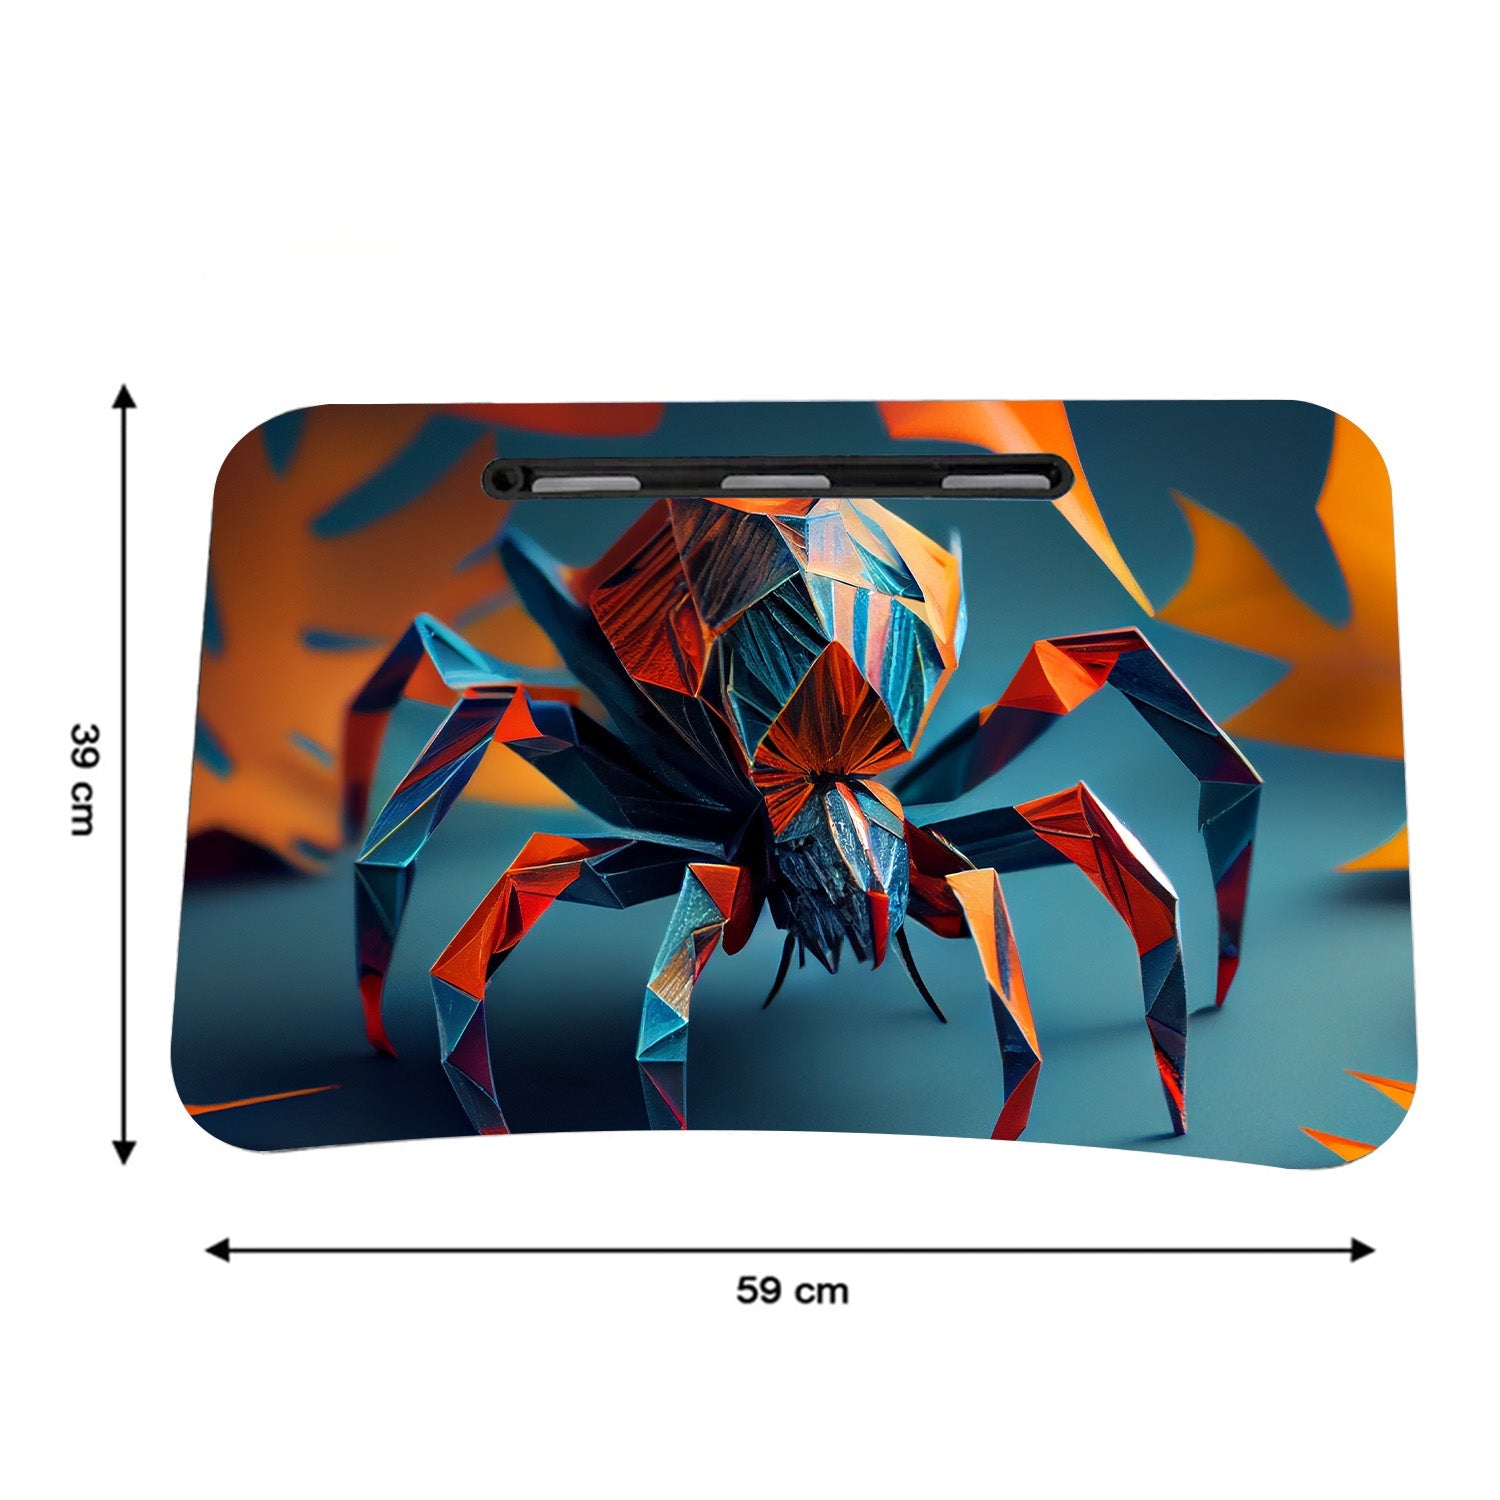 7692 Foldable Laptop Spiderman Printed Table for Adults , Portable Study Table for Kids, Work from Home Lapdesk with Tablet Holder and Cupholder Table